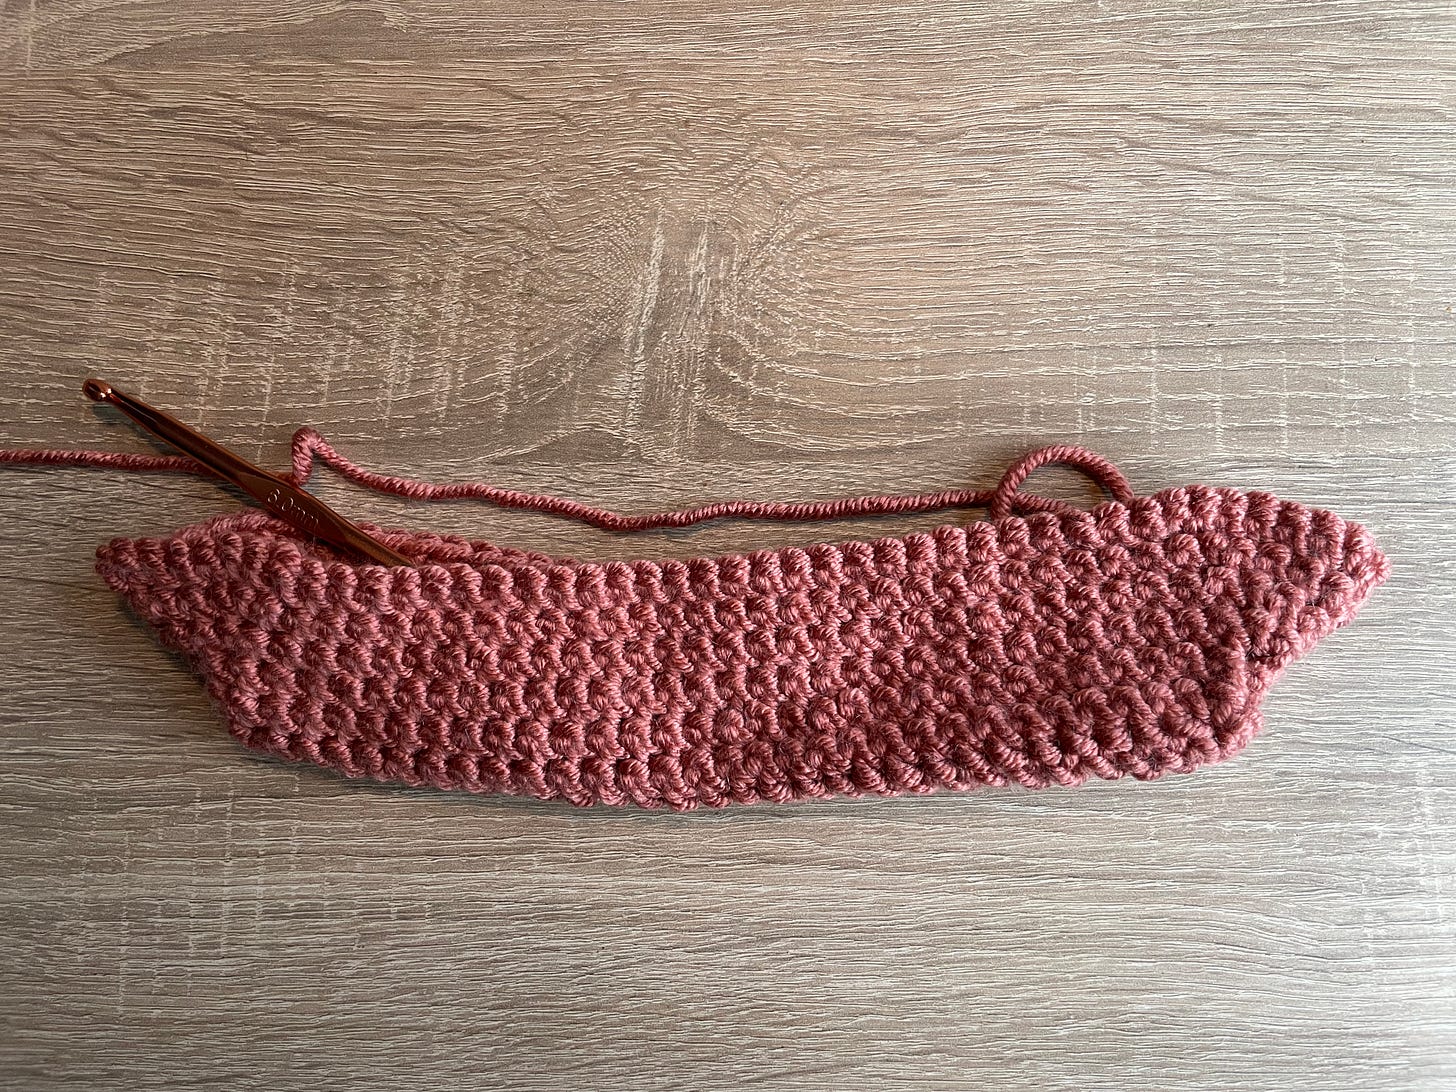 Photo of the crocheted base of the Dune bag